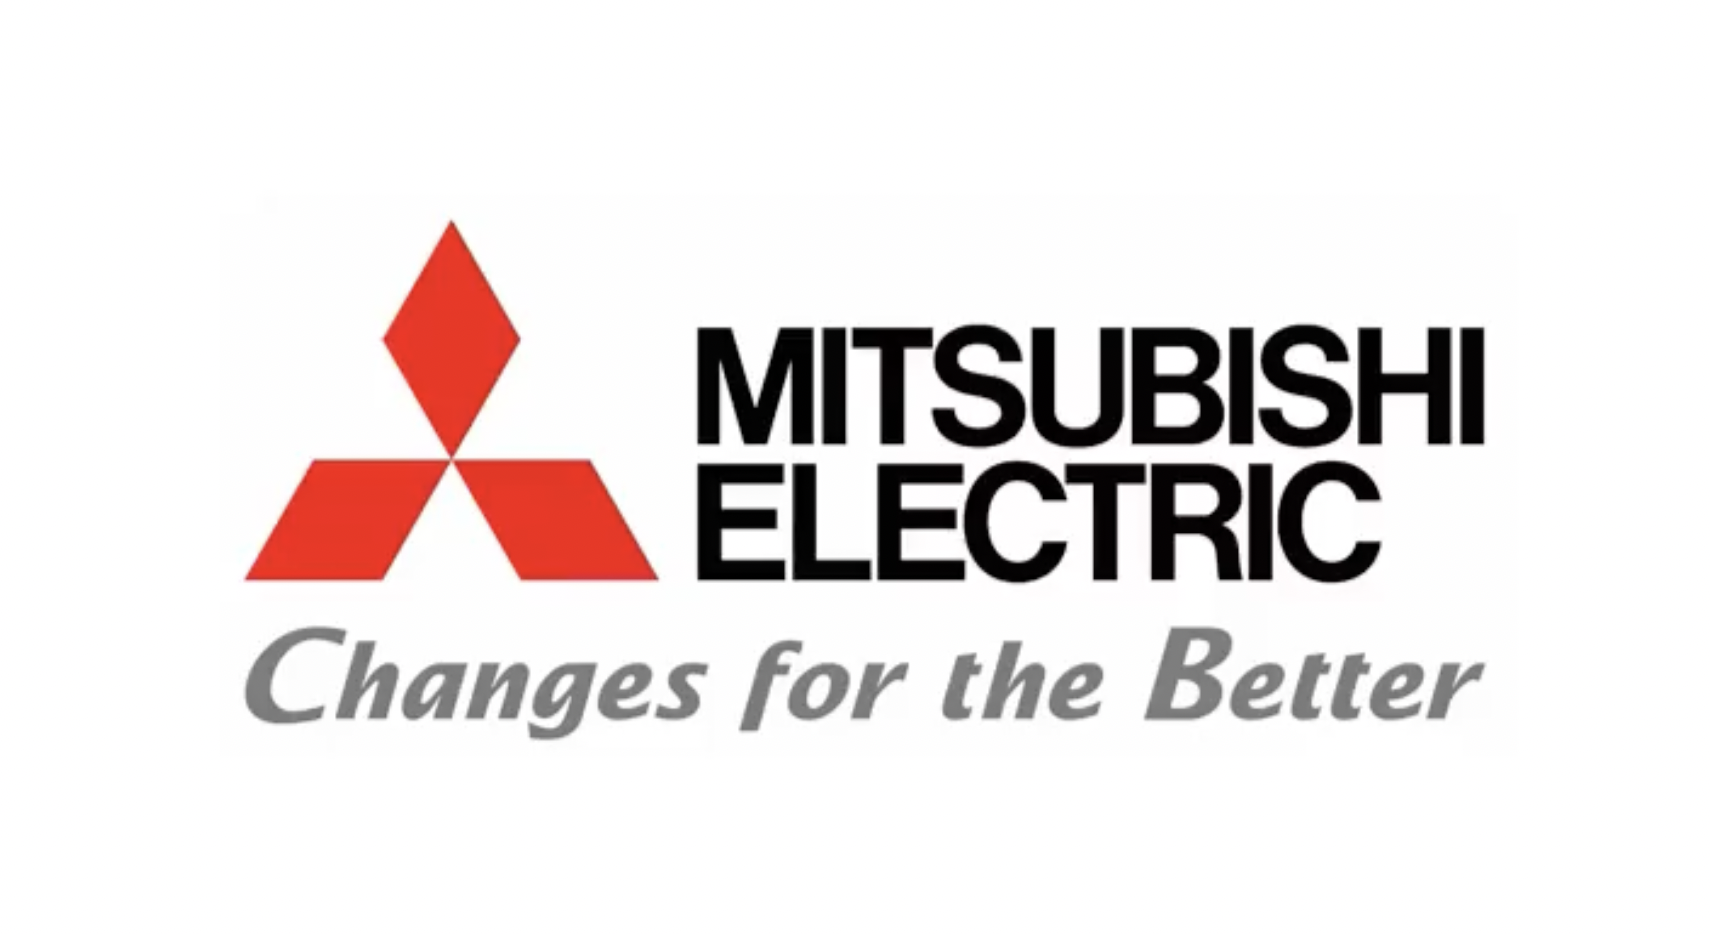 Mitsubishi Electric releases environmental plan 2025 to drive sustainability